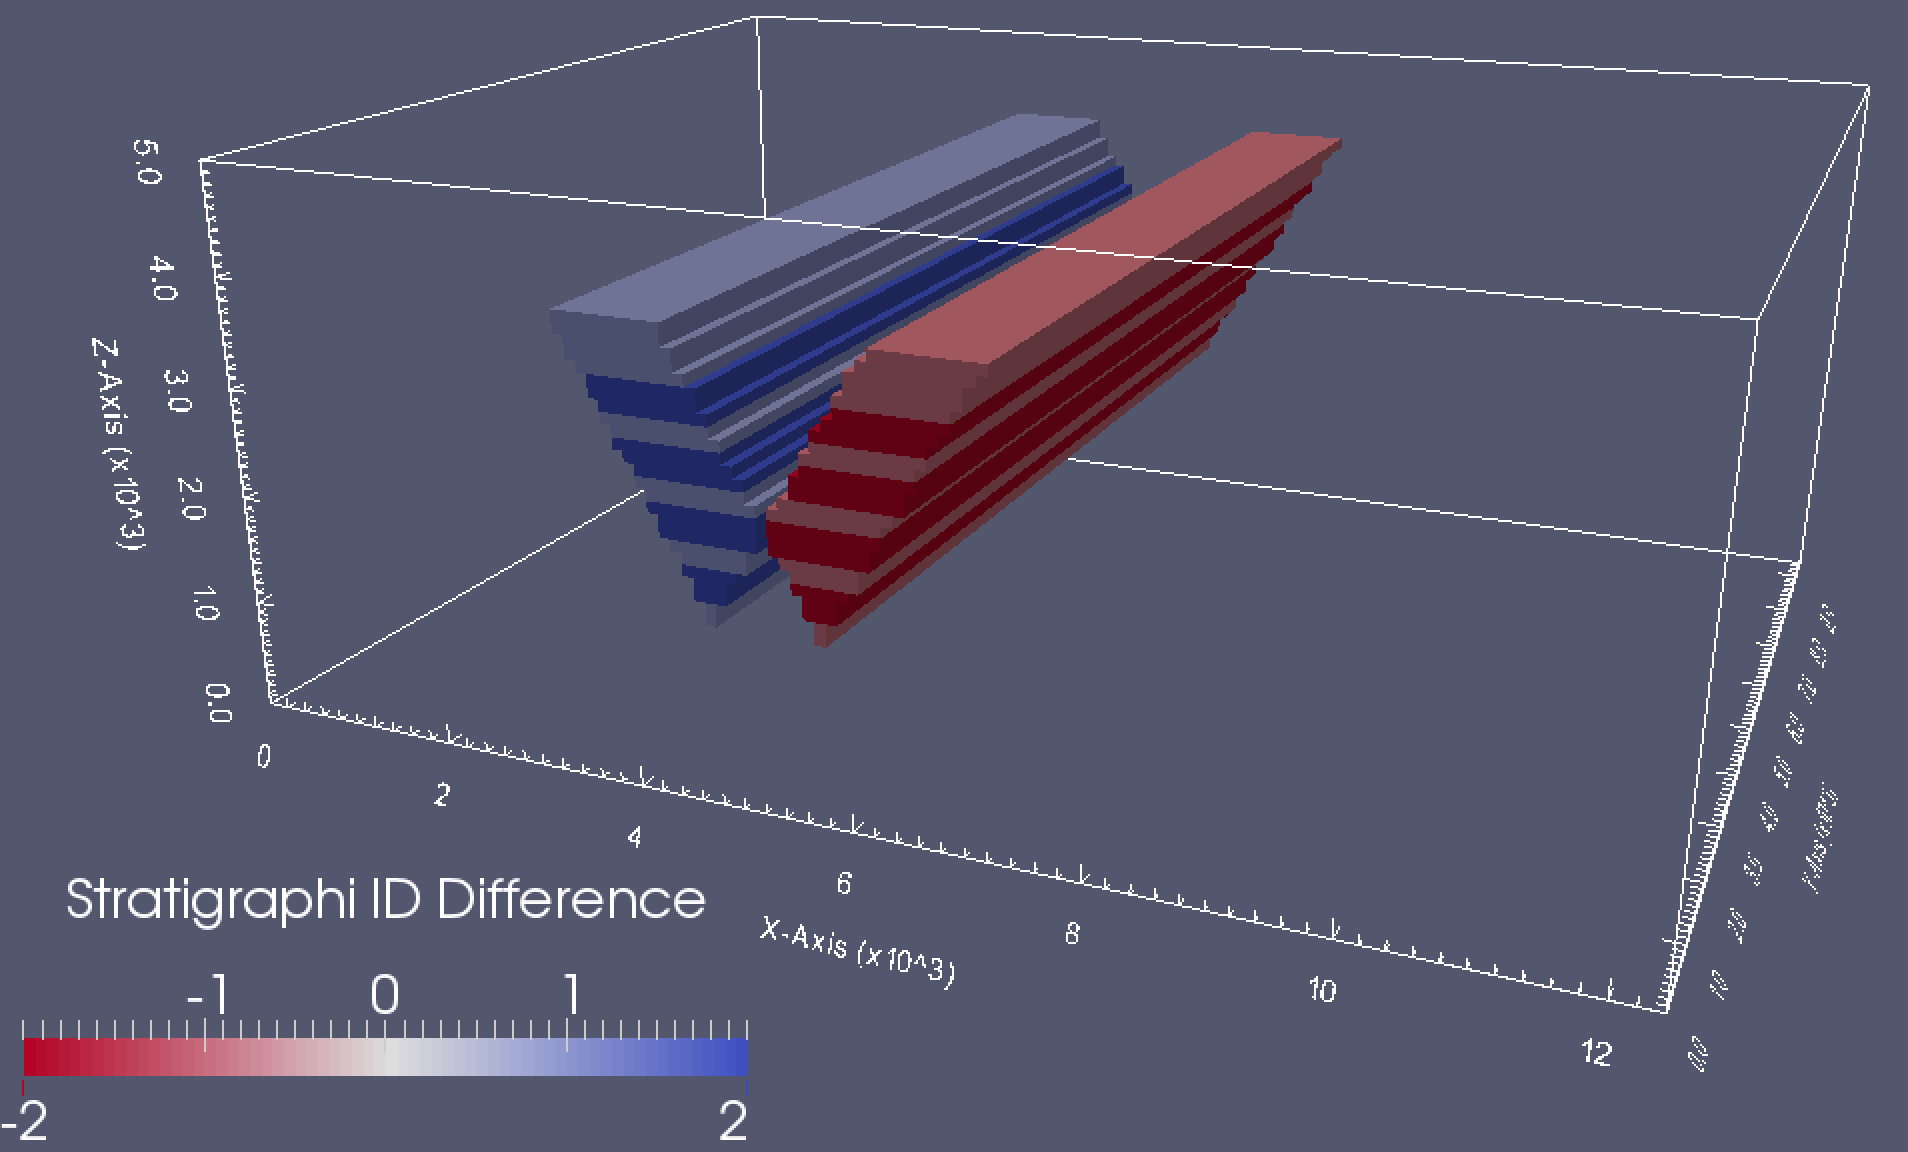 3-D visualisation of stratigraphic id difference